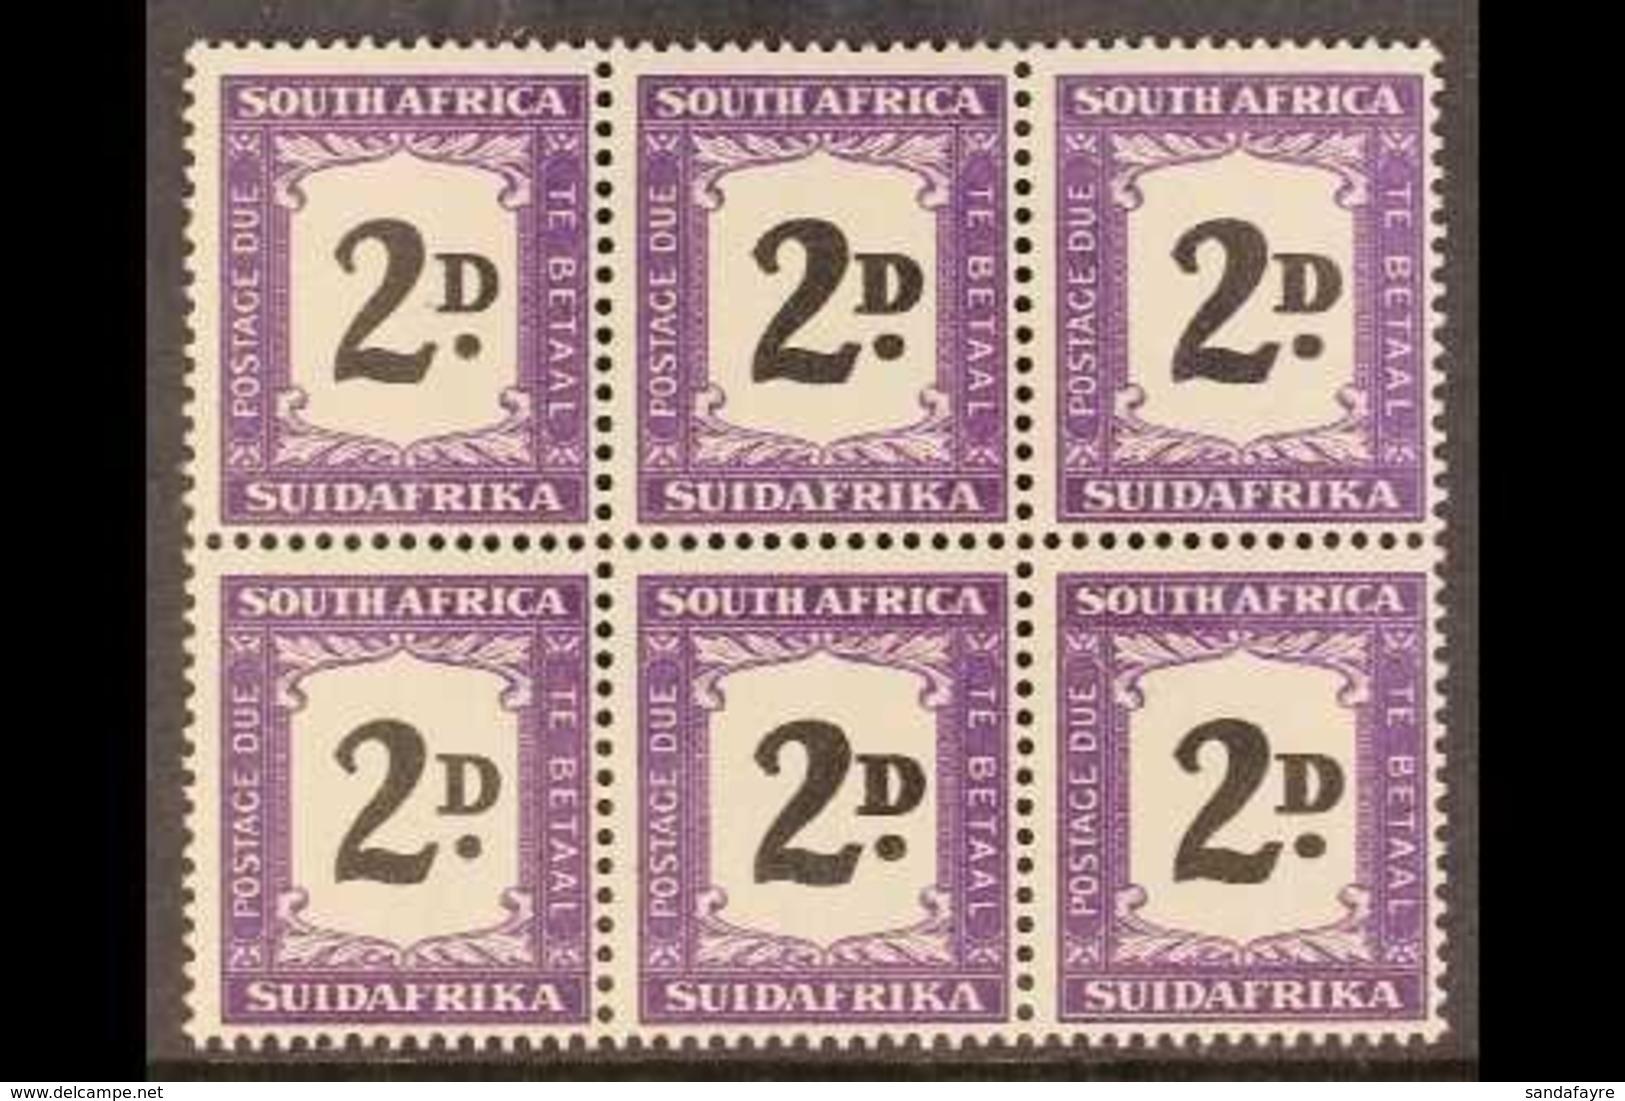 1948-49 POSTAGE DUE 2d Black And Violet, Block Of Six, Showing Thick (double) "D" In Four Positions (R15 5-6, R16 5-6),  - Zonder Classificatie